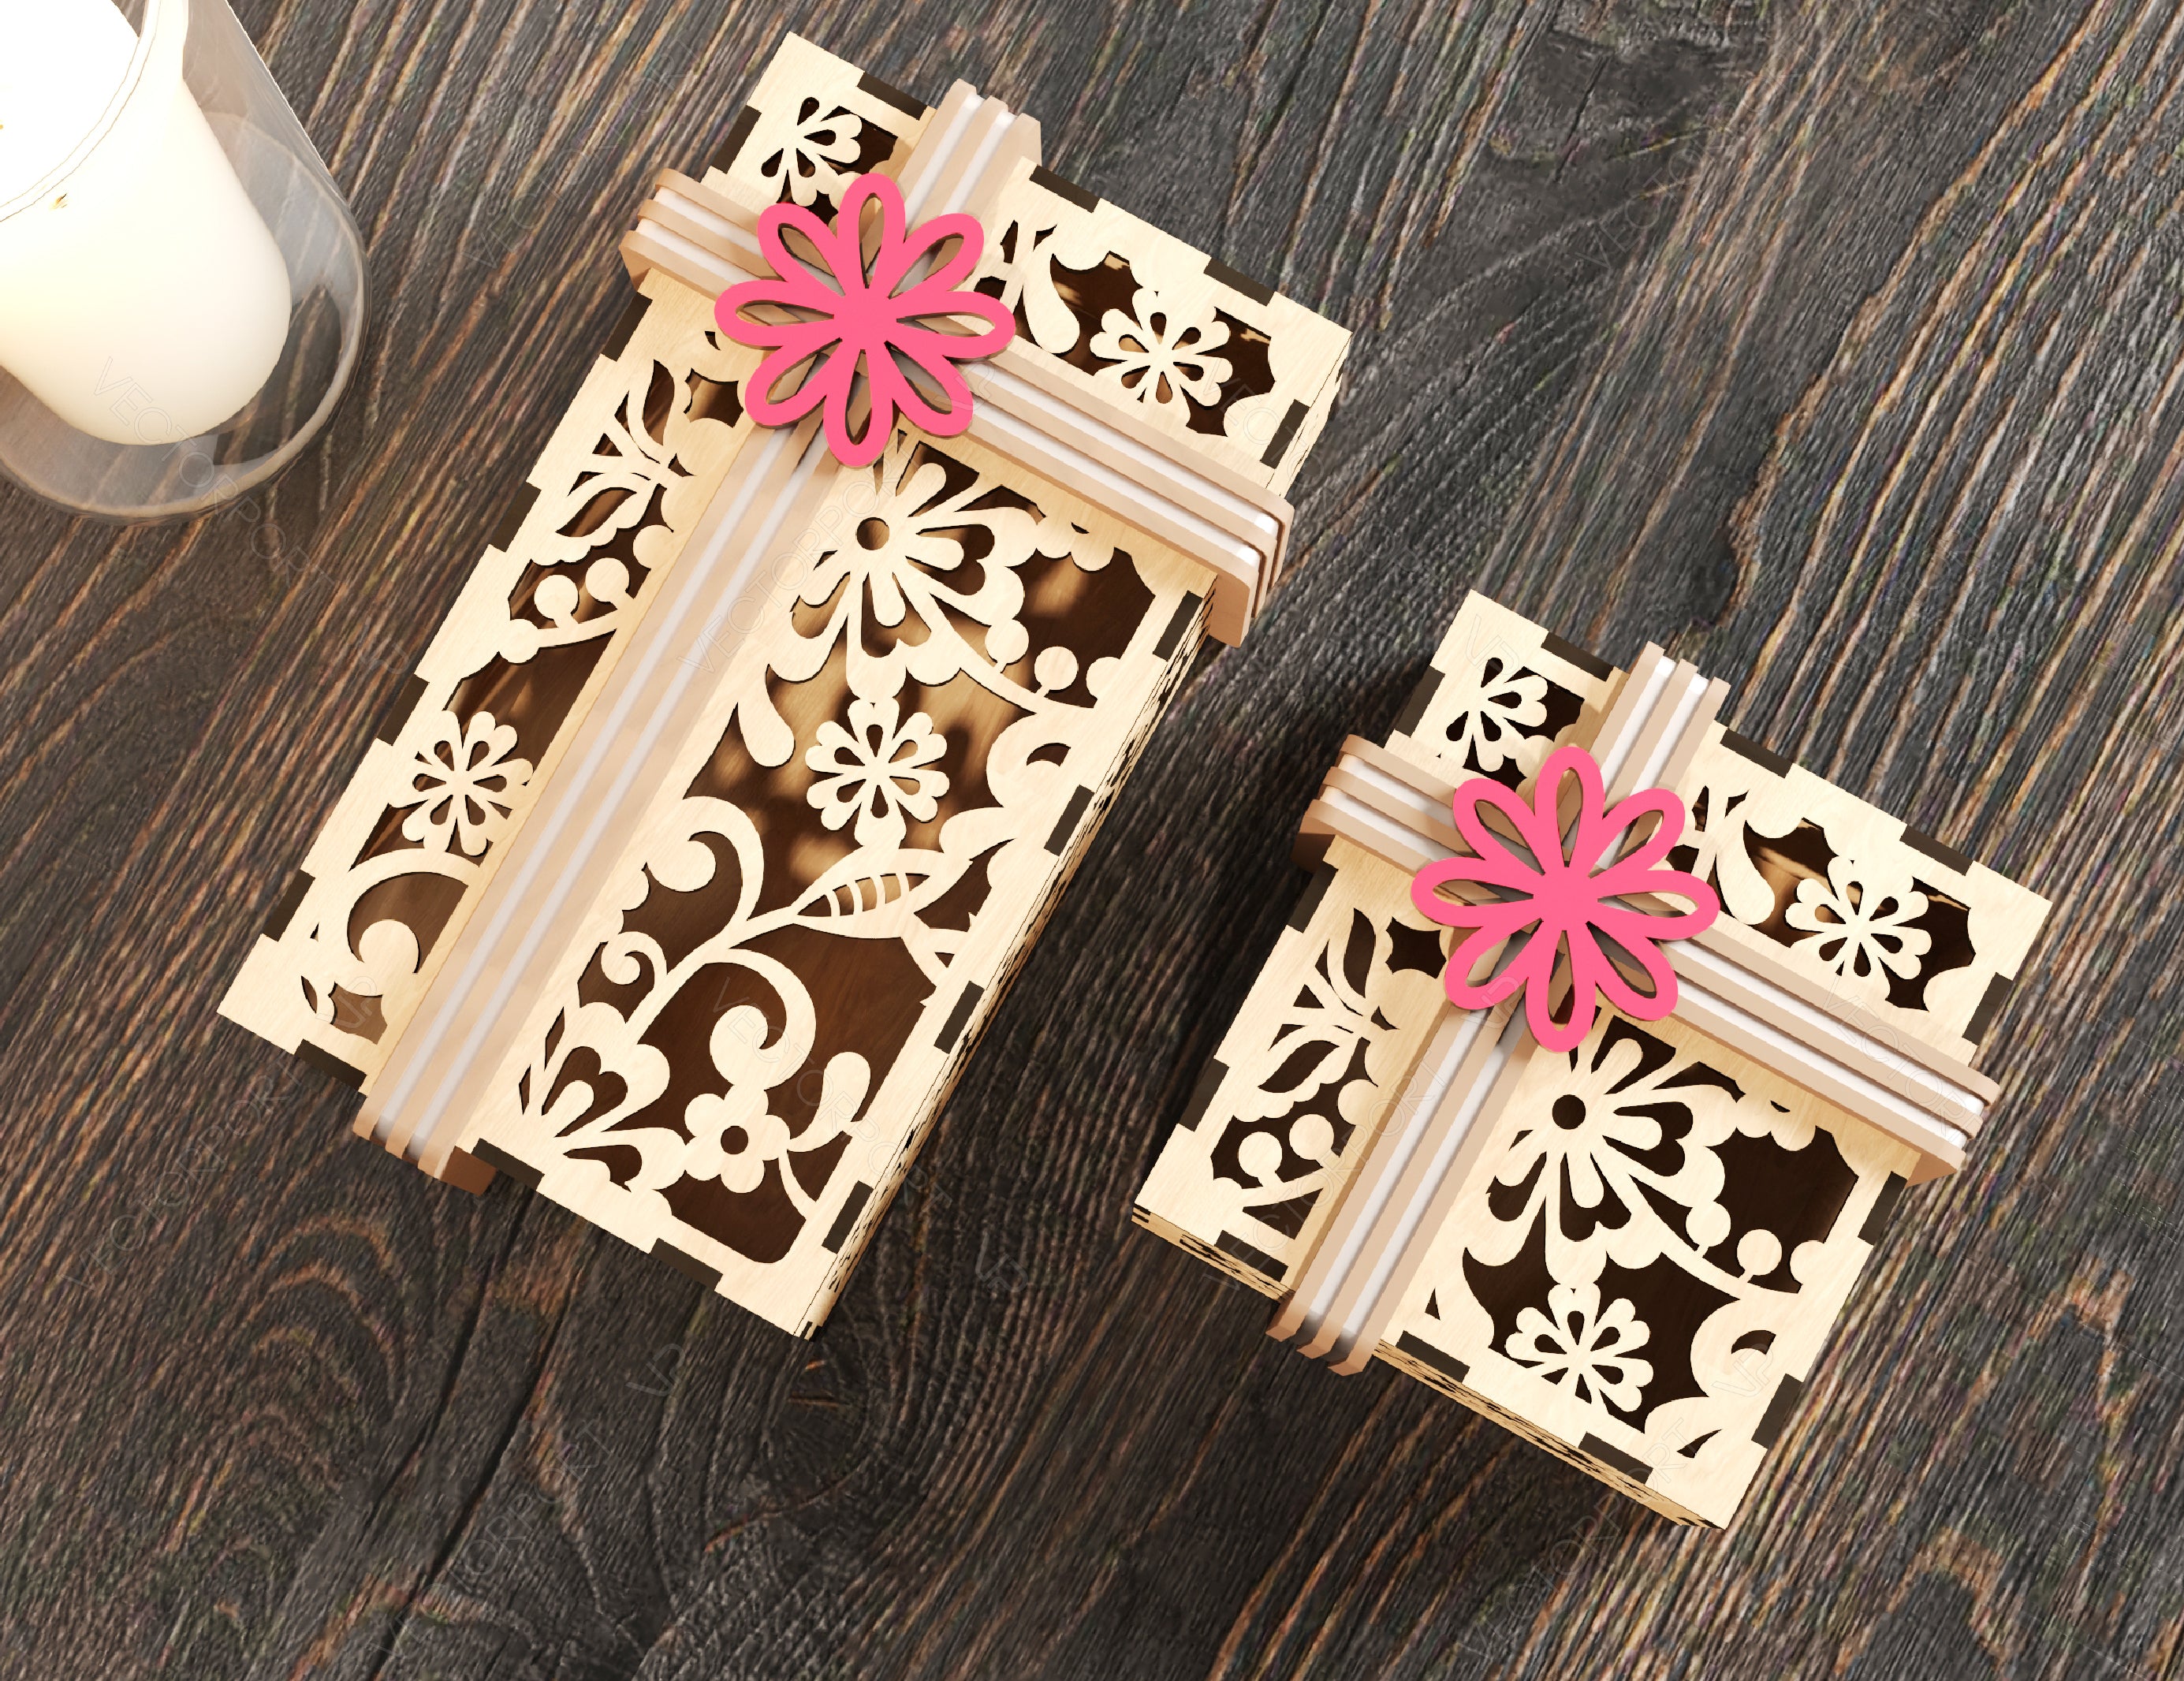 Gift Box Laser Cut with Ribbon Decorative Flowers pattern opener jeweler case Wedding Love vector Digital Download |#202|